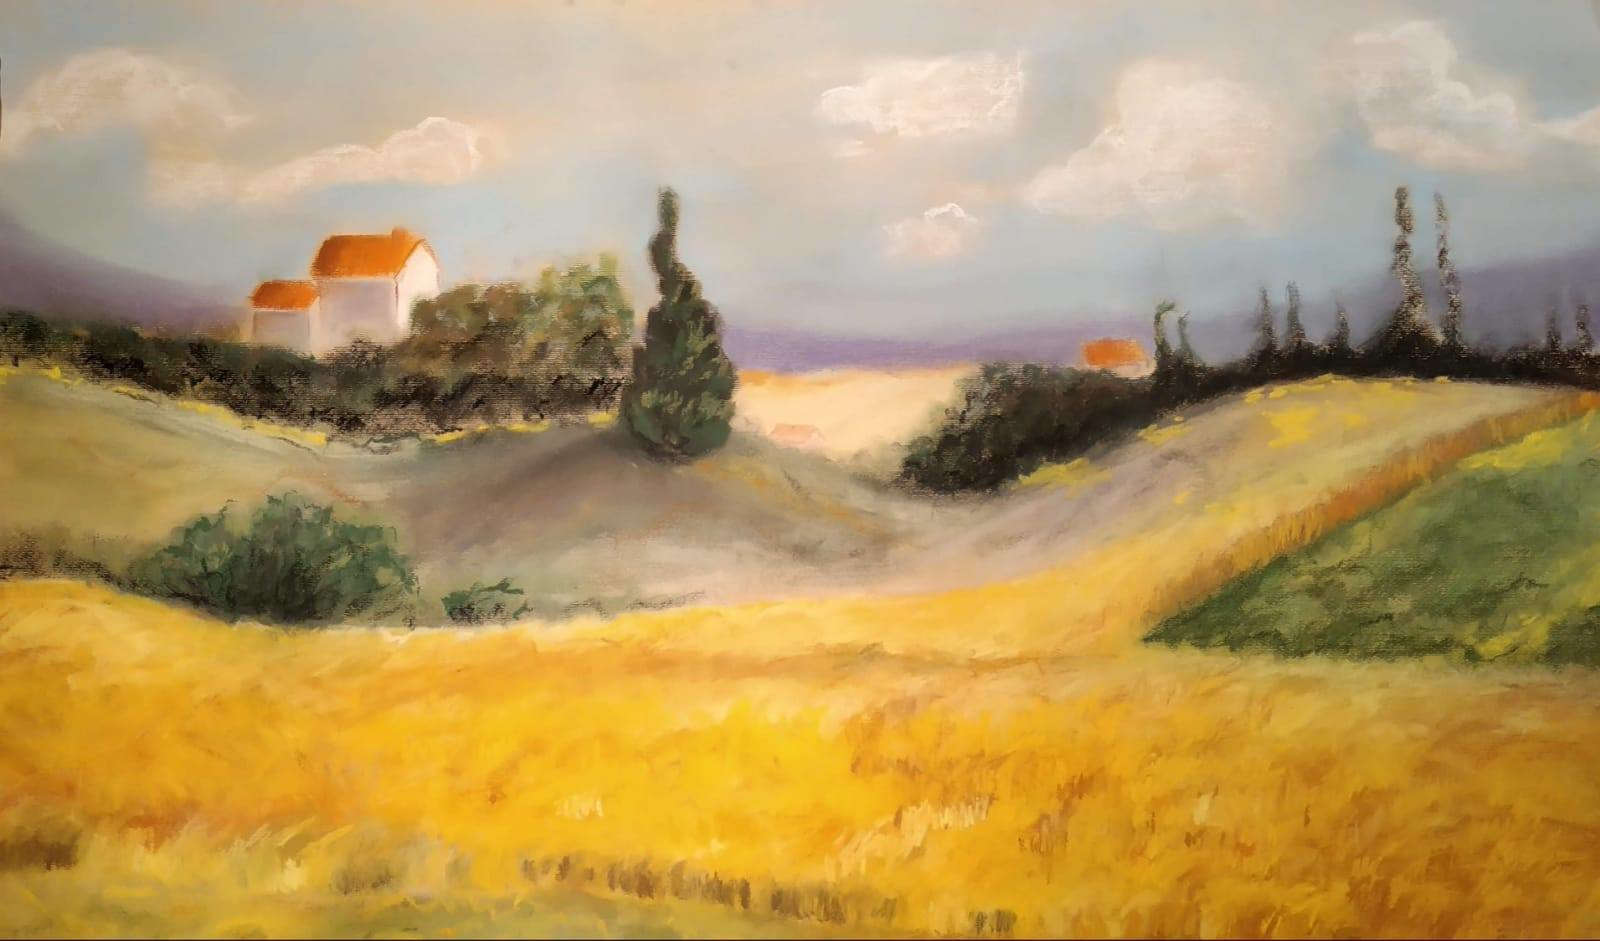 Landscape showing yellow and green fields and three houses on a horizon.